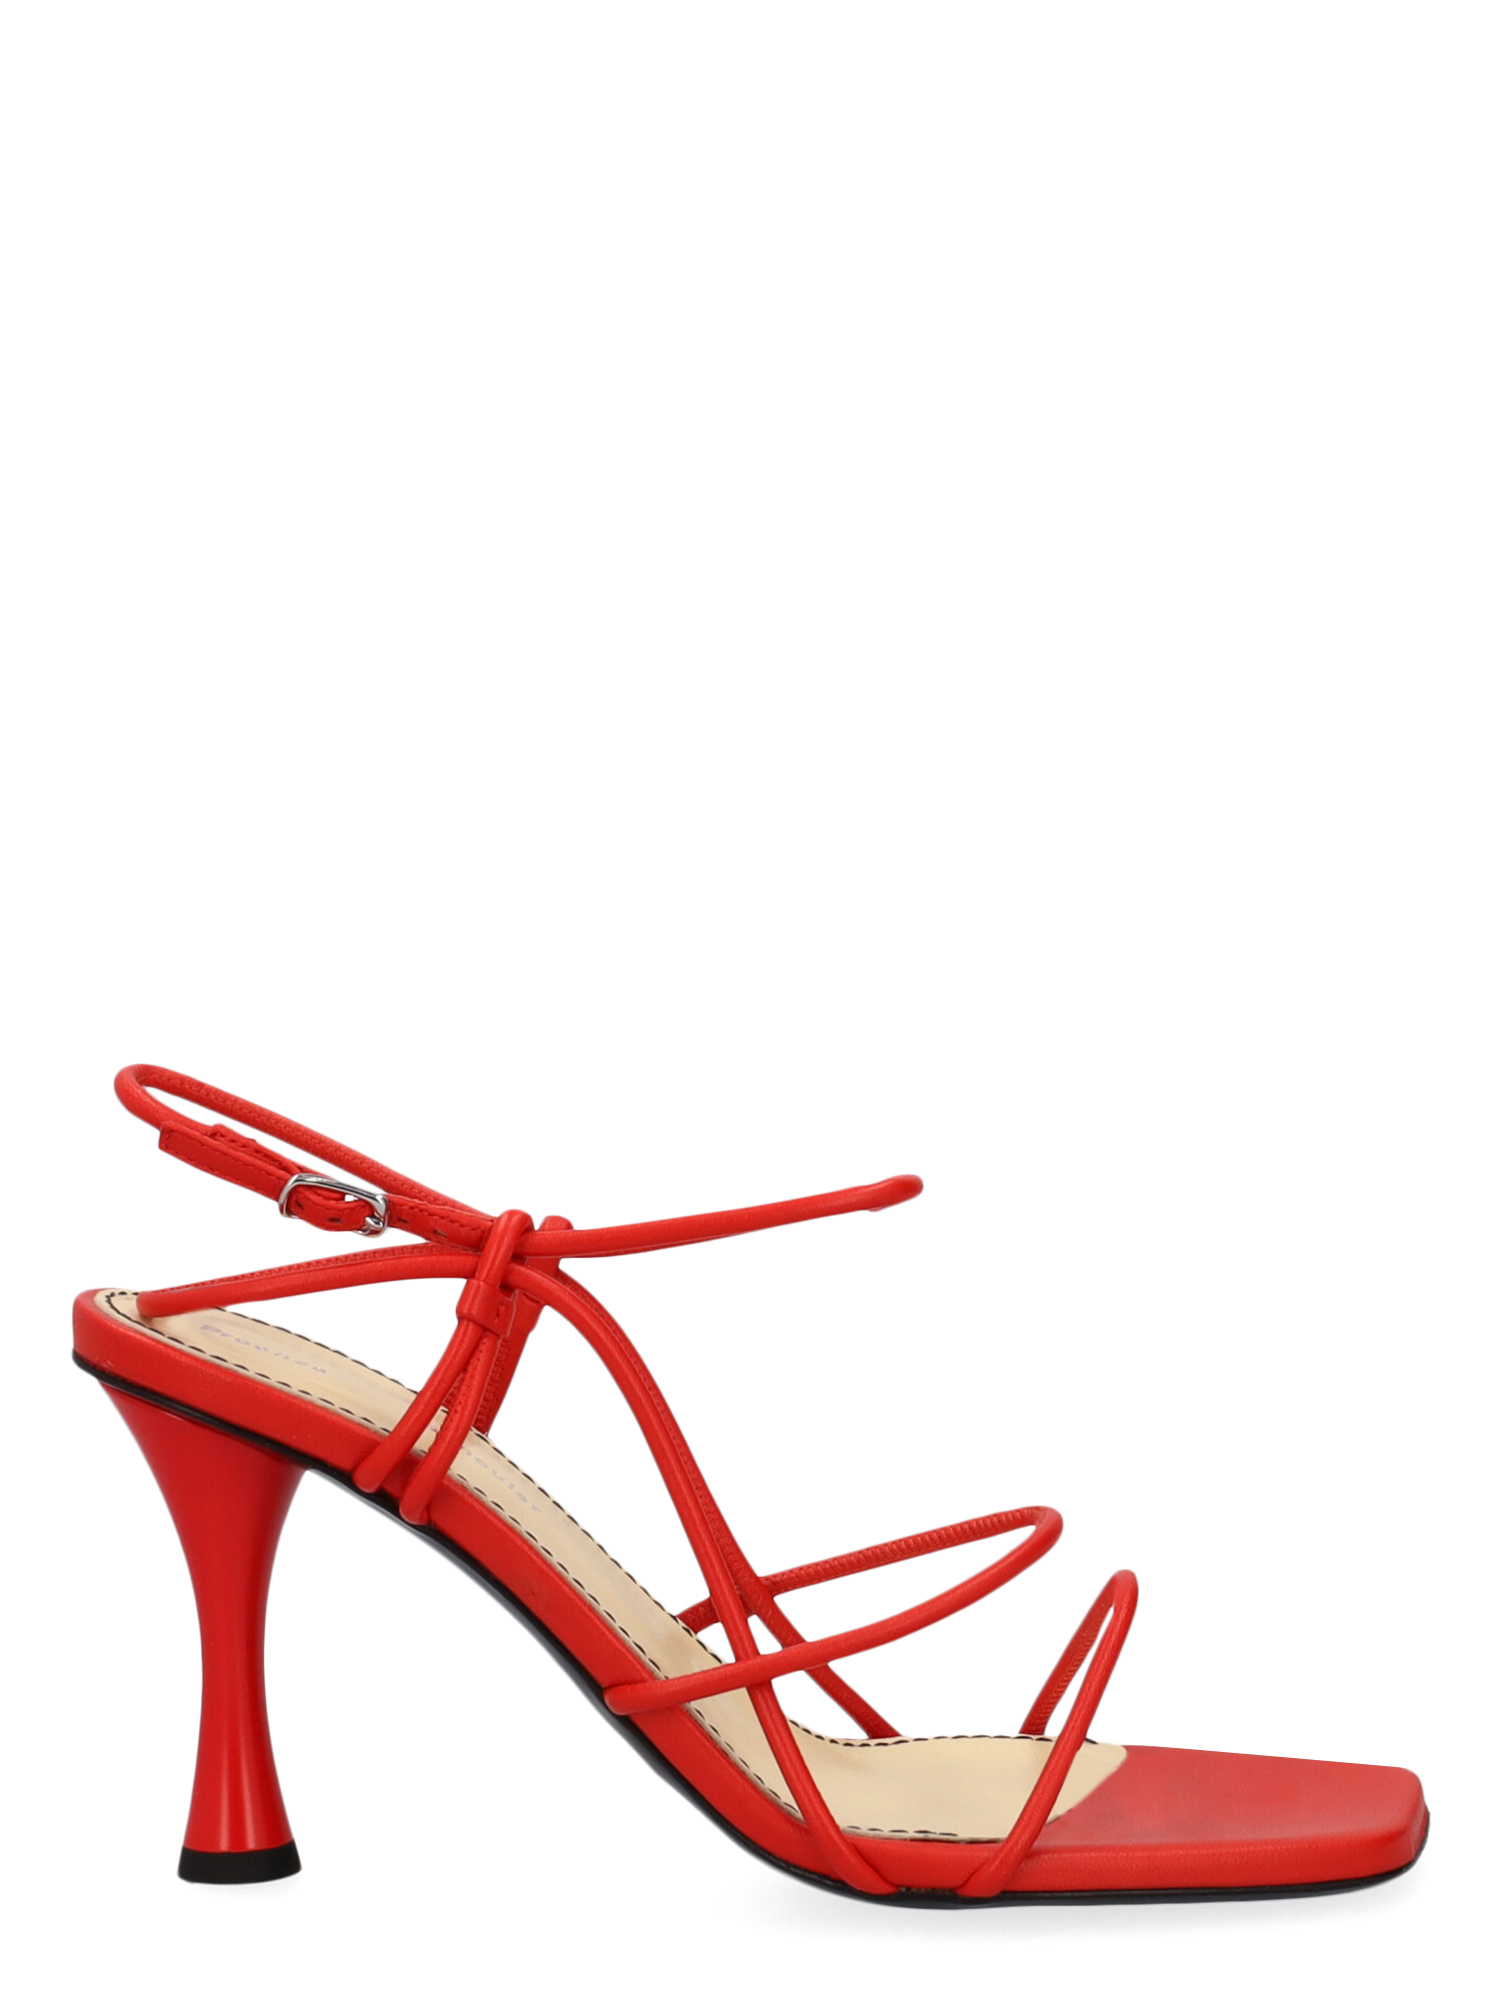 Pre-owned Proenza Schouler Women's Sandals -  - In Red Leather